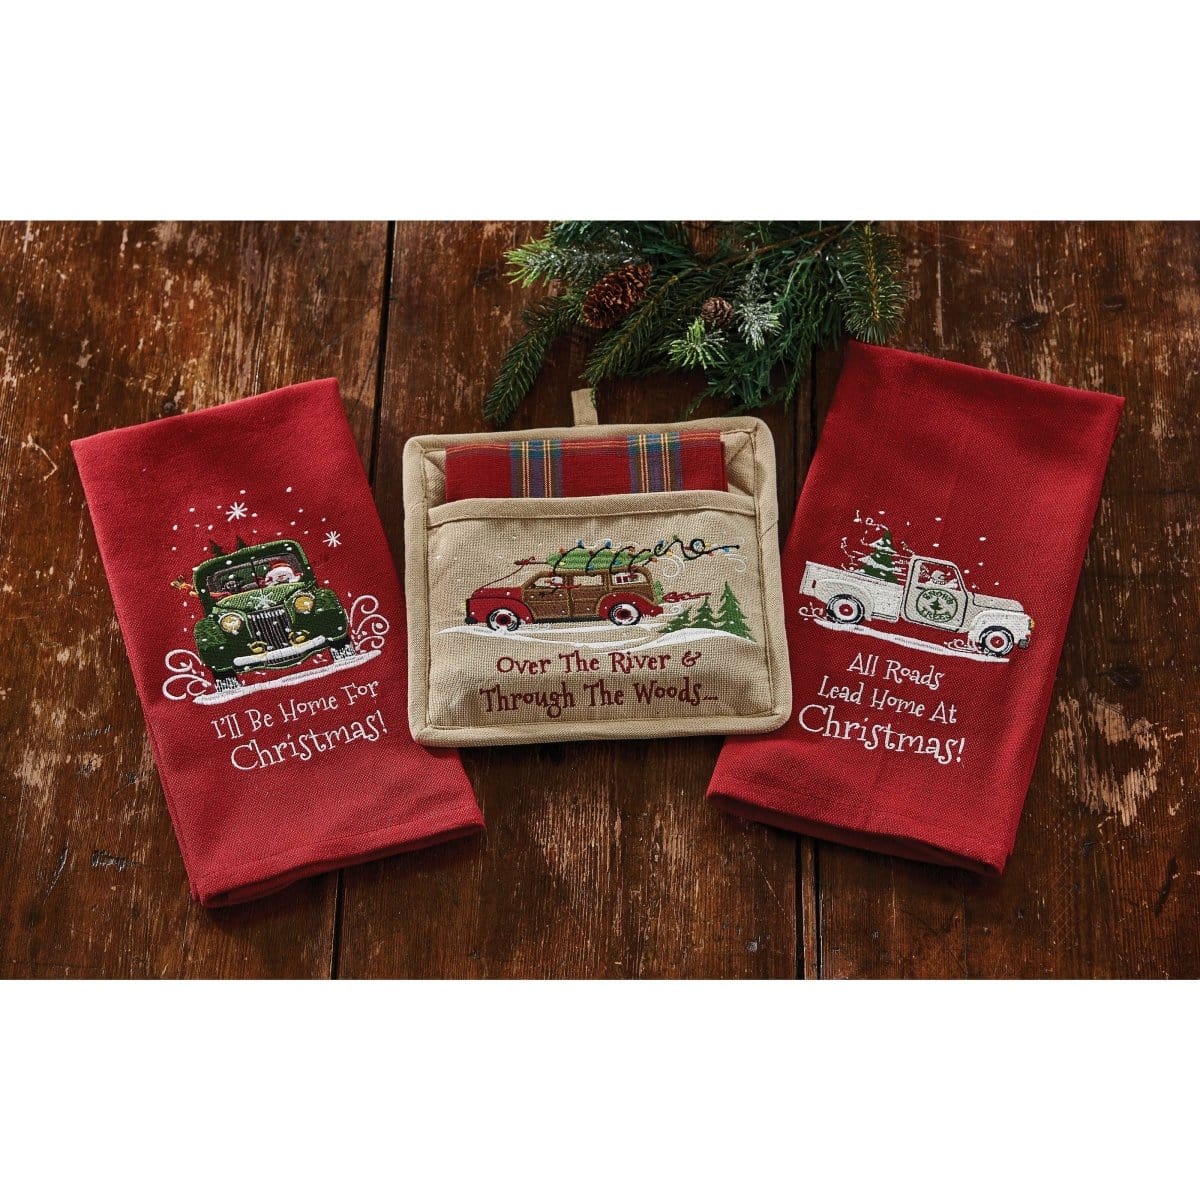 I'll be home for christmas Decorative Towel-Park Designs-The Village Merchant